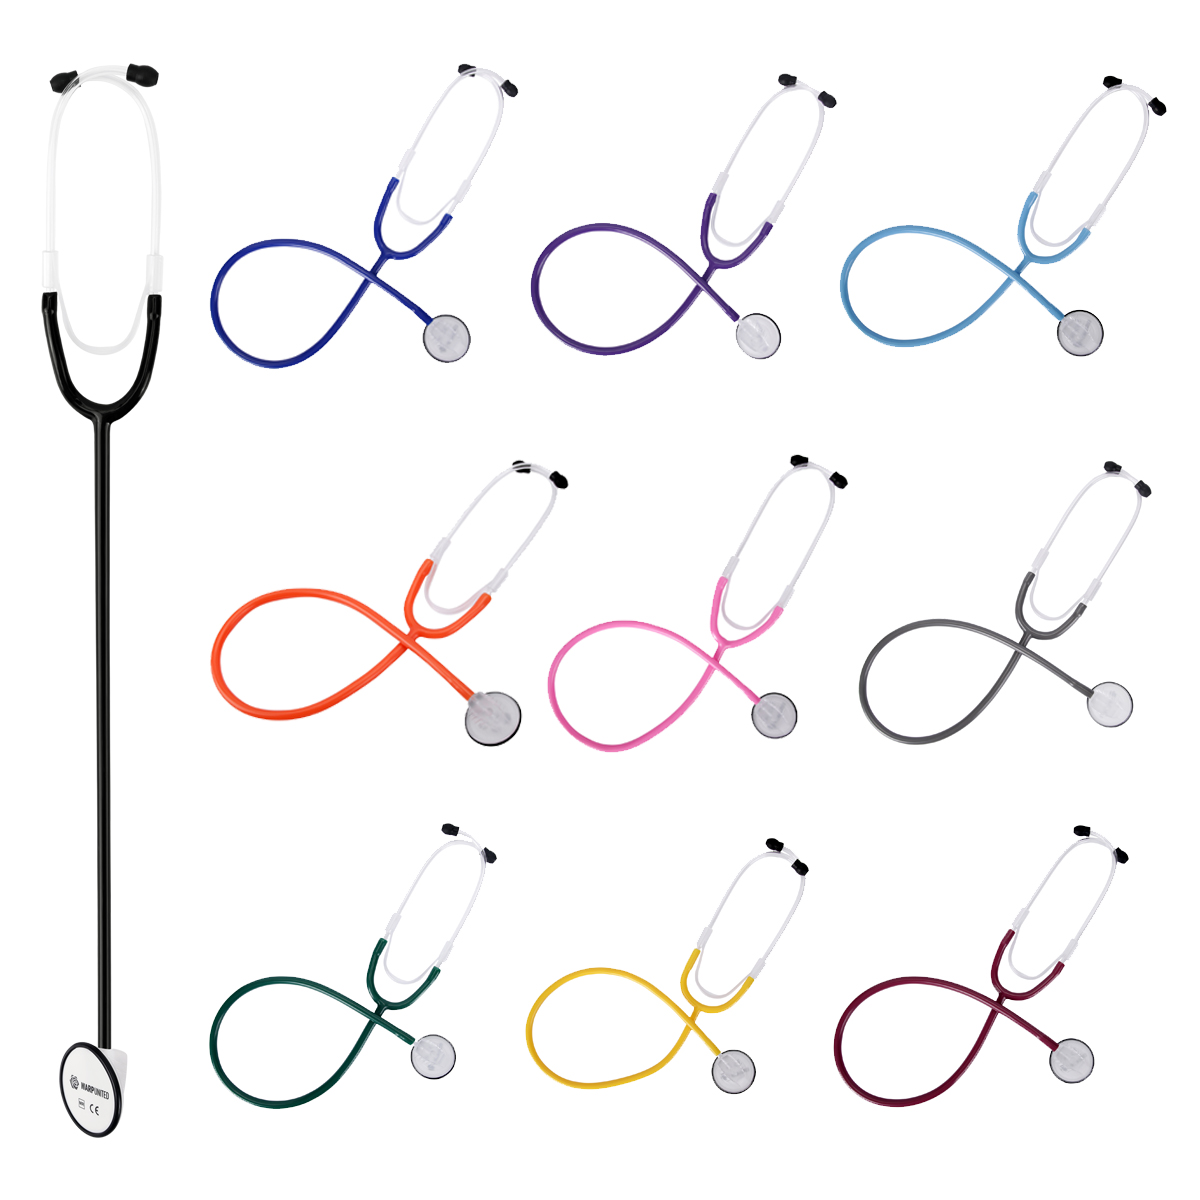 TK1 Professional Disposable MR Safe Stethoscope DualFrequency